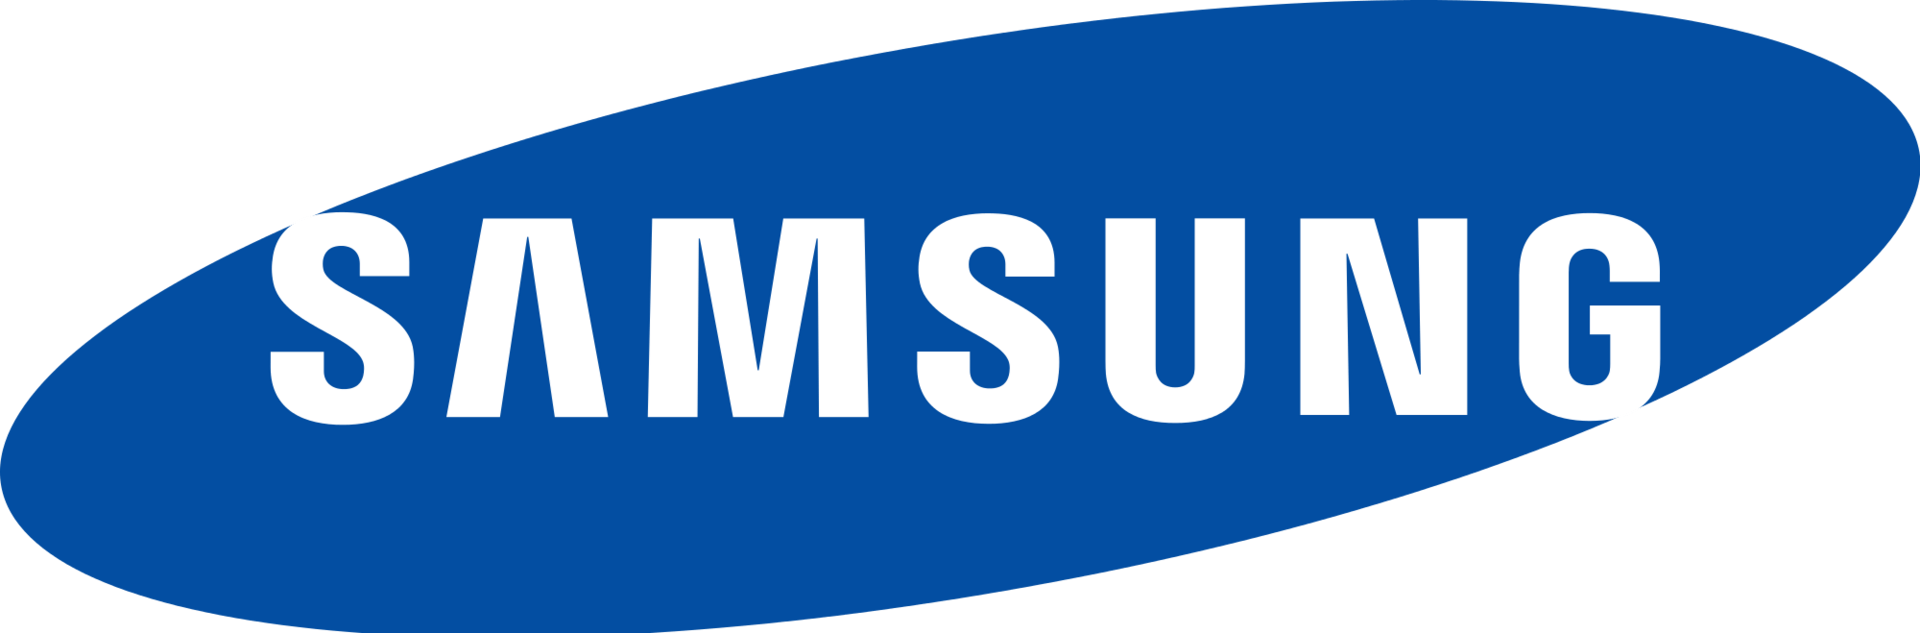 Samsung Corp Logo - Samsung might split in two - NotebookCheck.net News